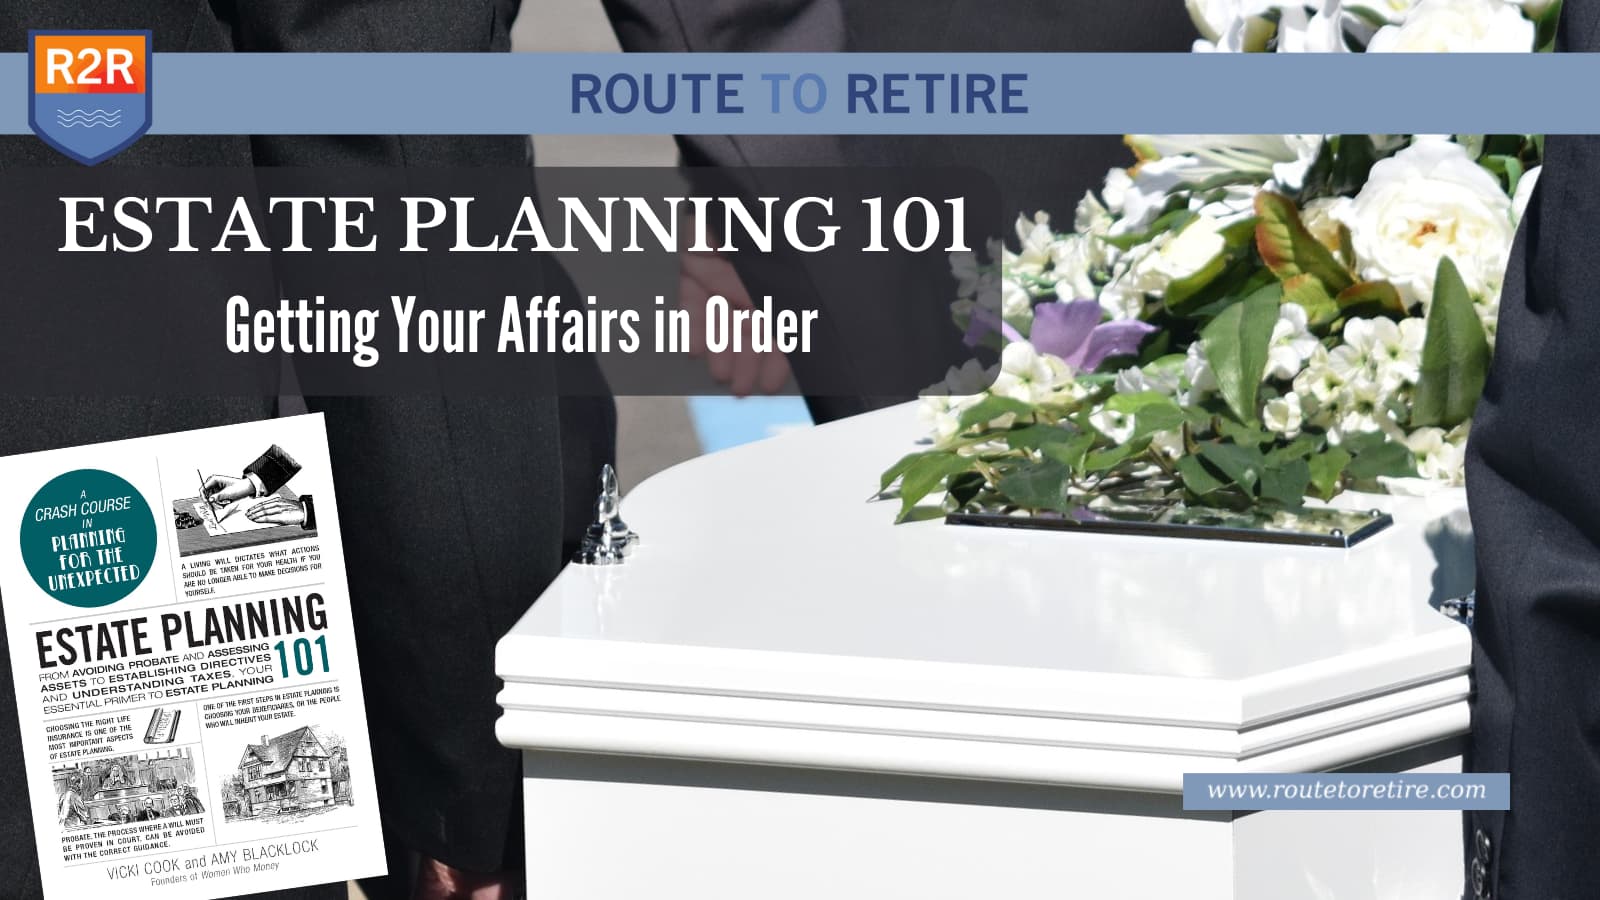 Estate Planning 101 – Getting Your Affairs in Order